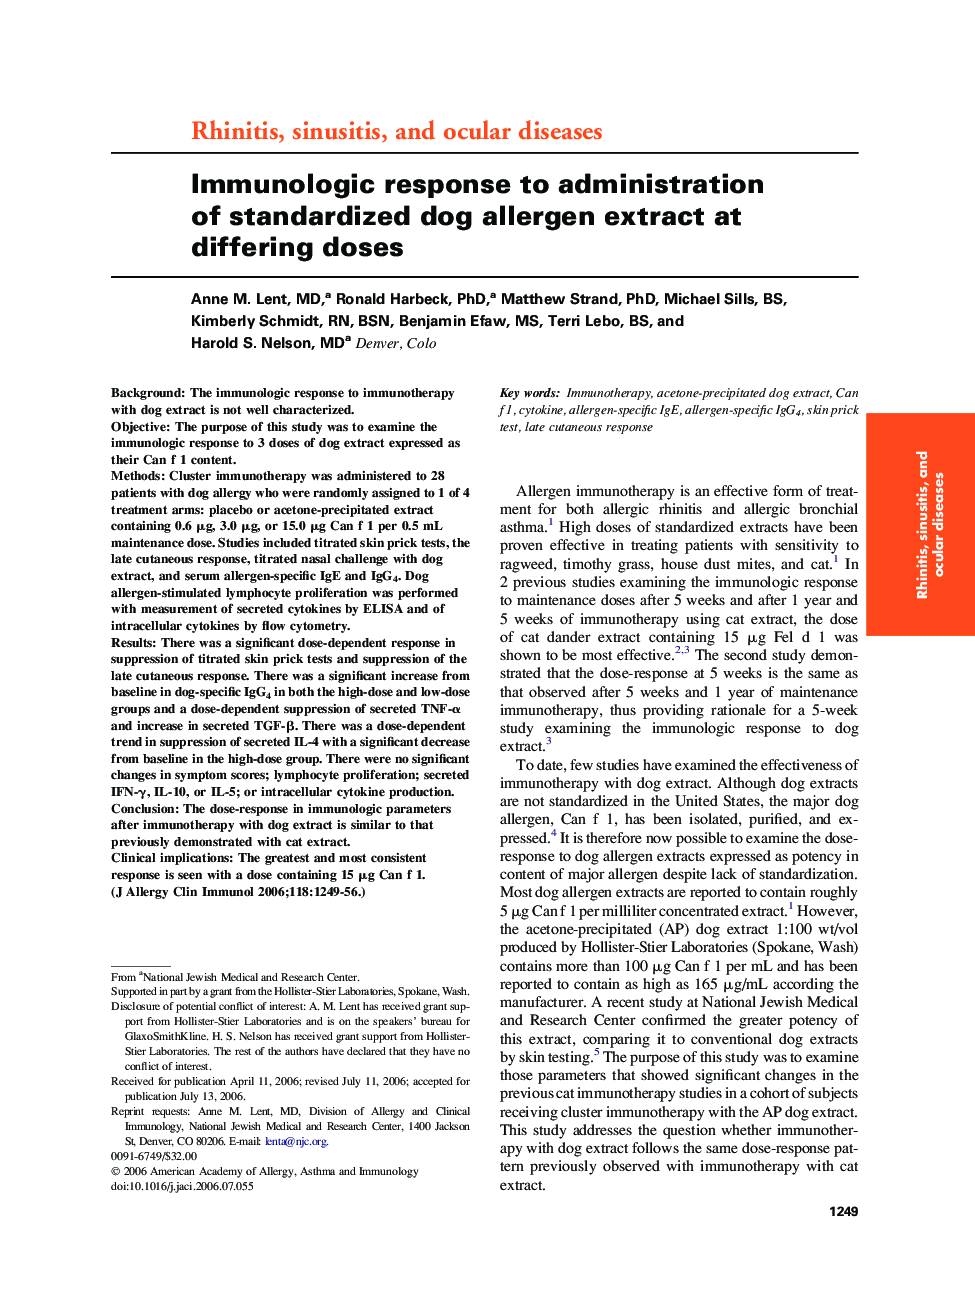 Immunologic response to administration of standardized dog allergen extract at differing doses 